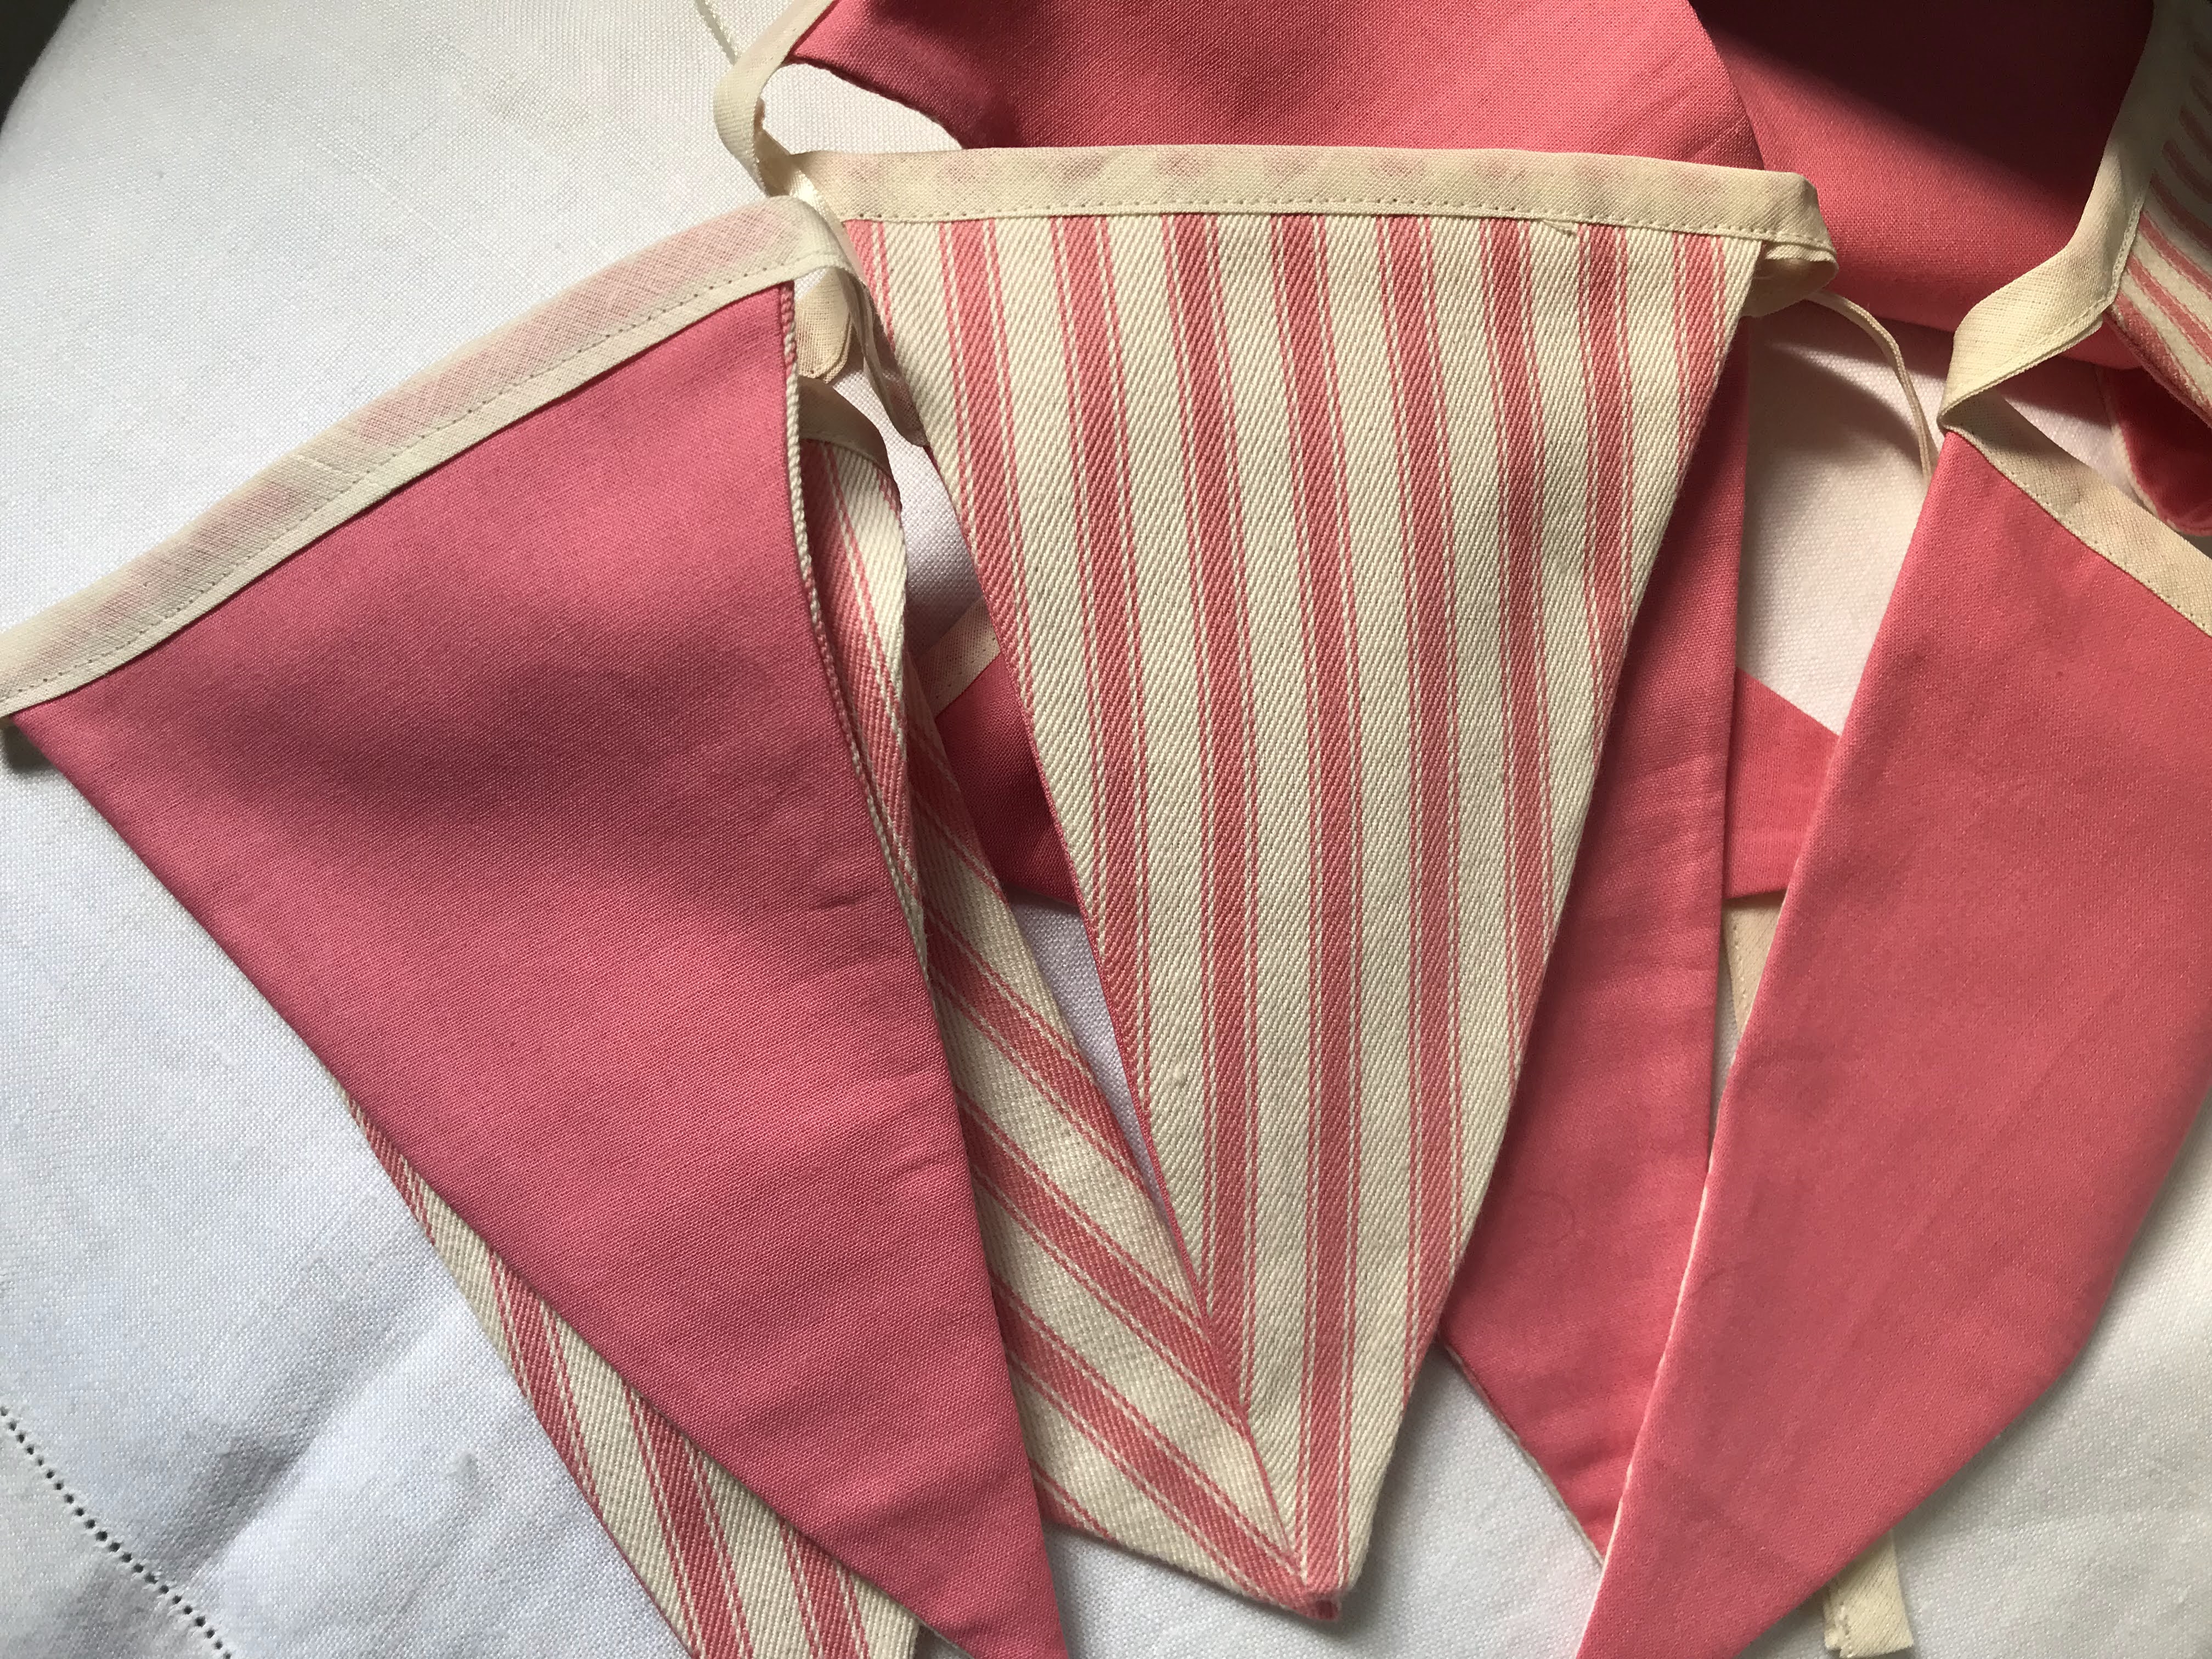 Bunting - pink and white stripe